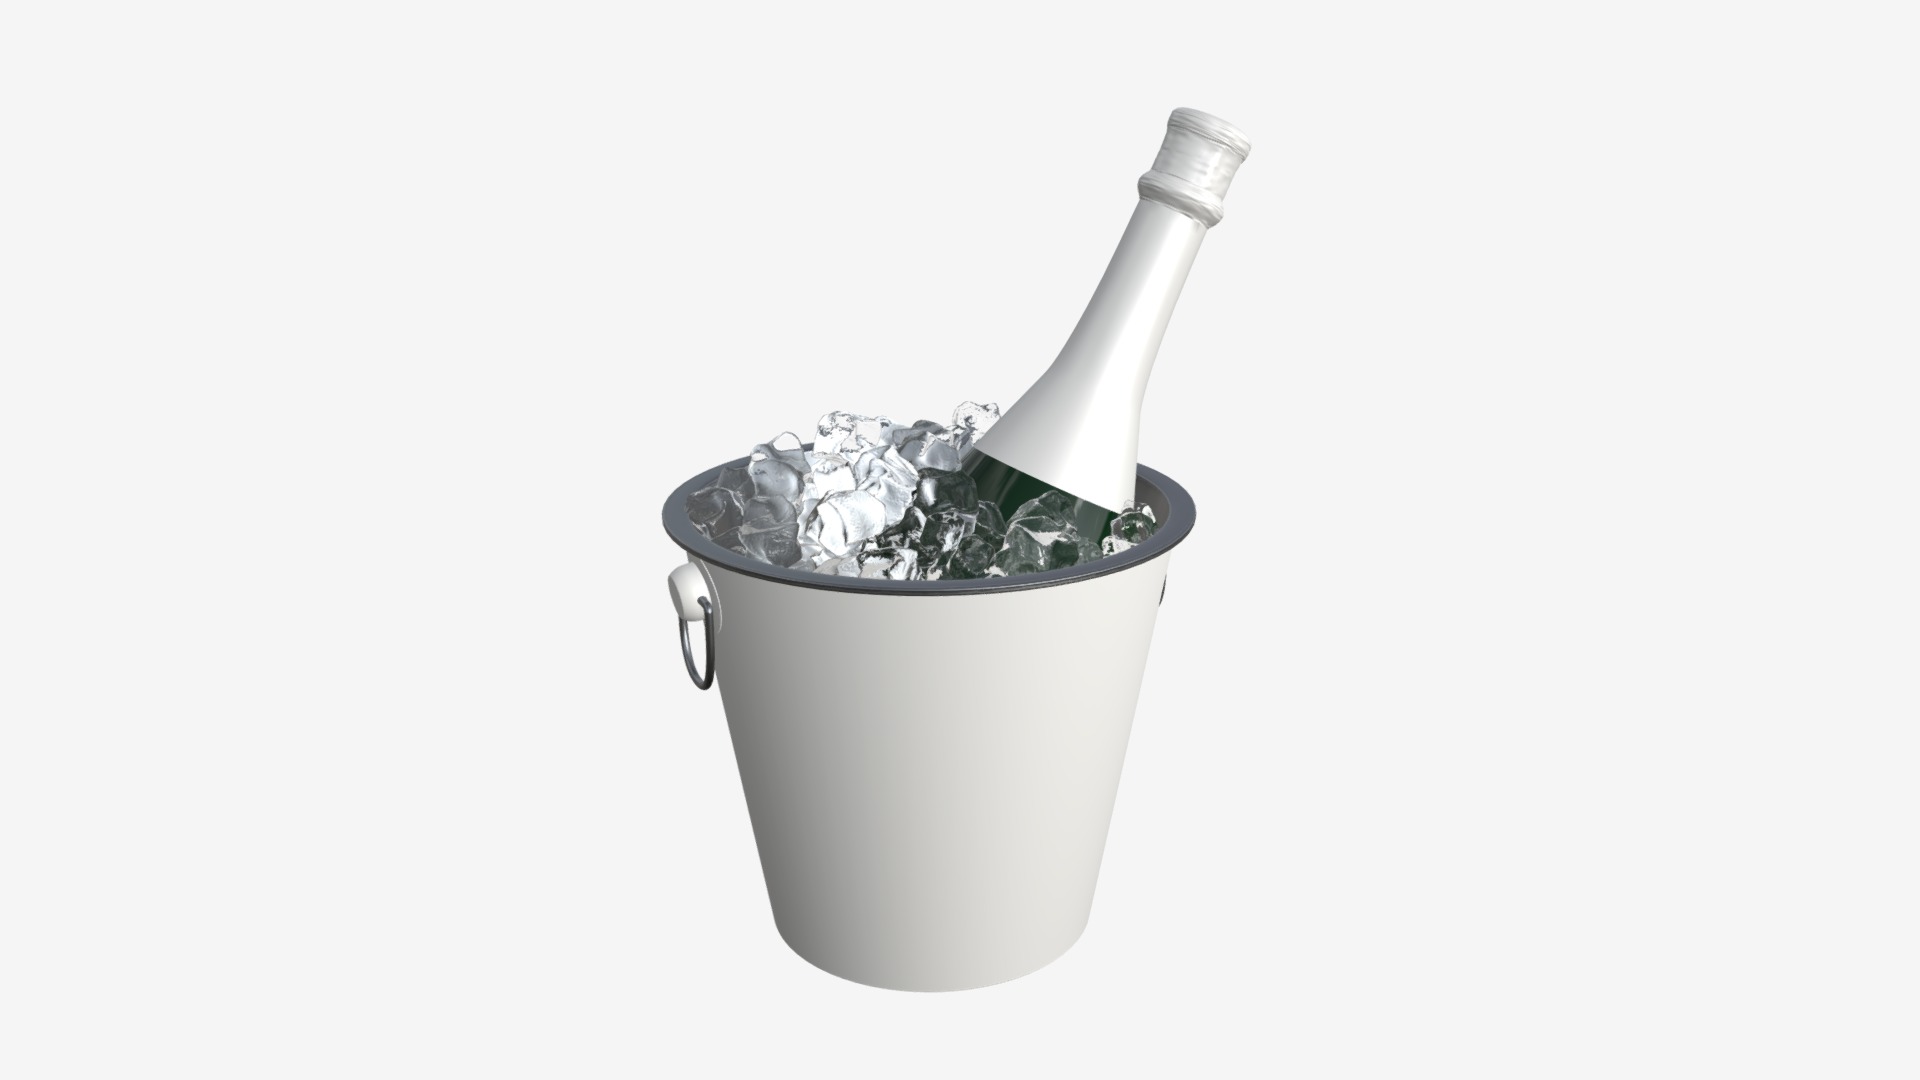 3D model champagne bottle in metal bucket - This is a 3D model of the champagne bottle in metal bucket. The 3D model is about a white cup with a handle.